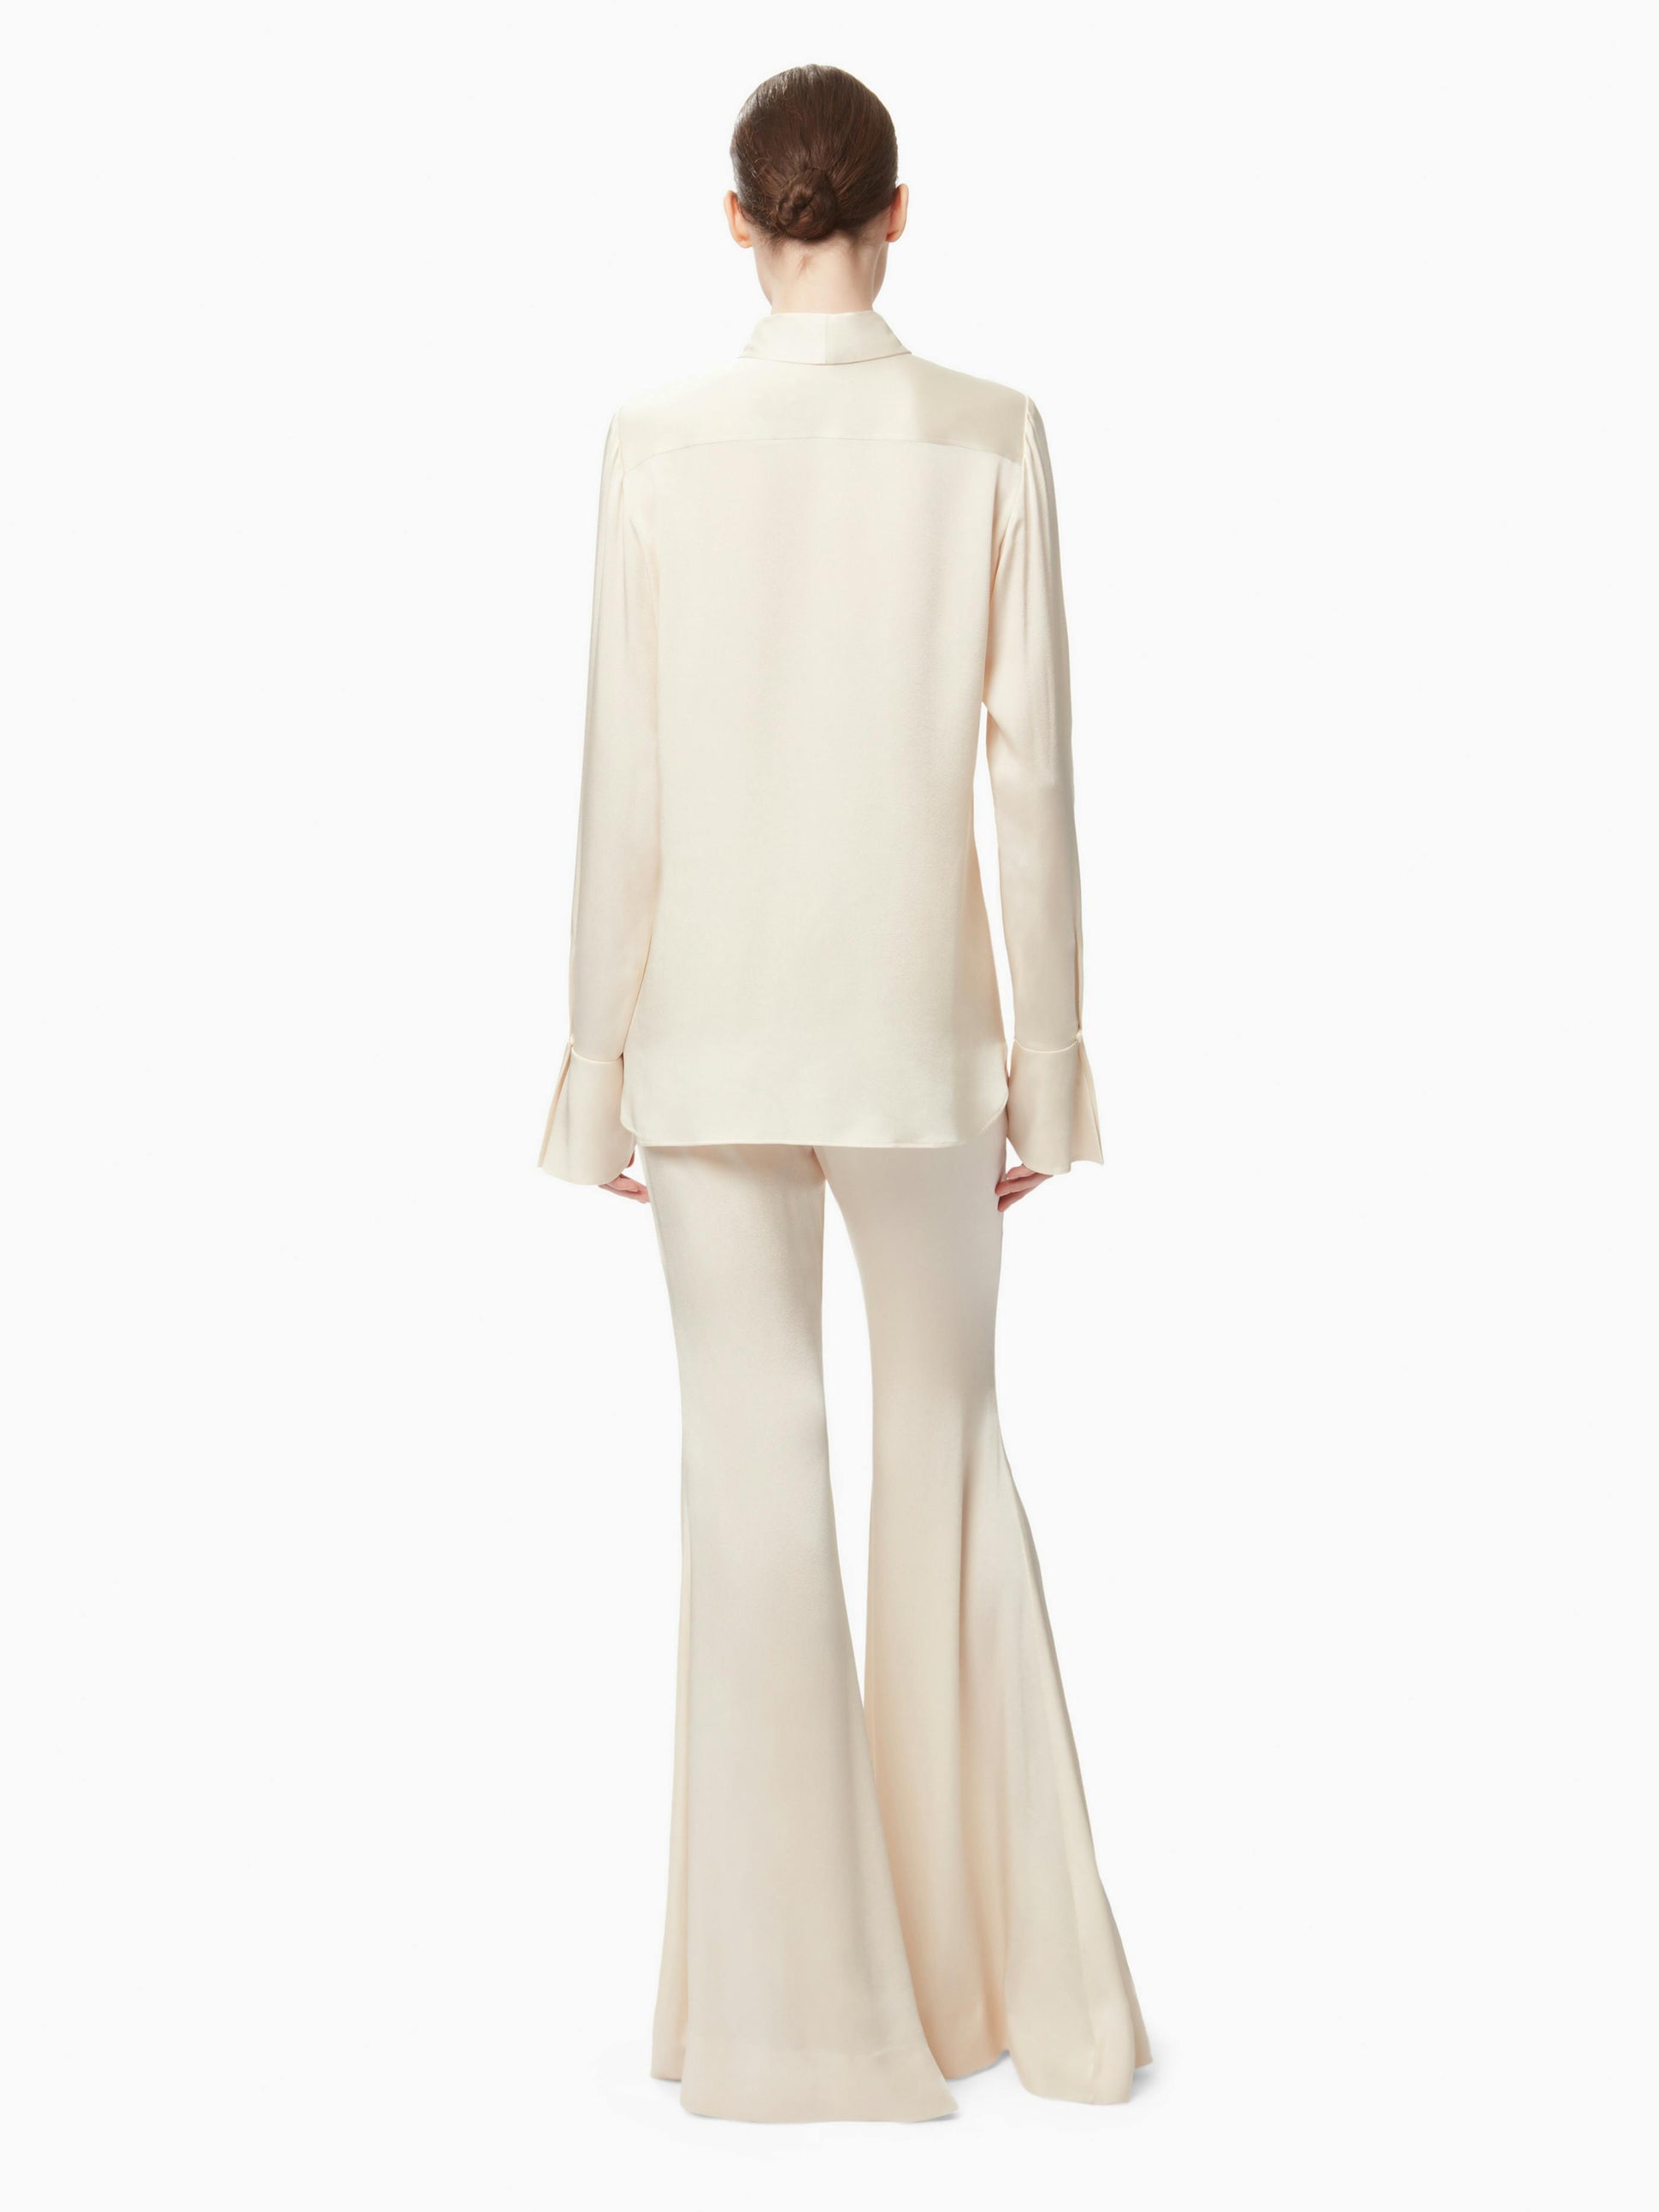 Satin Blouse With Neck-tie Champagne - Nina Ricci